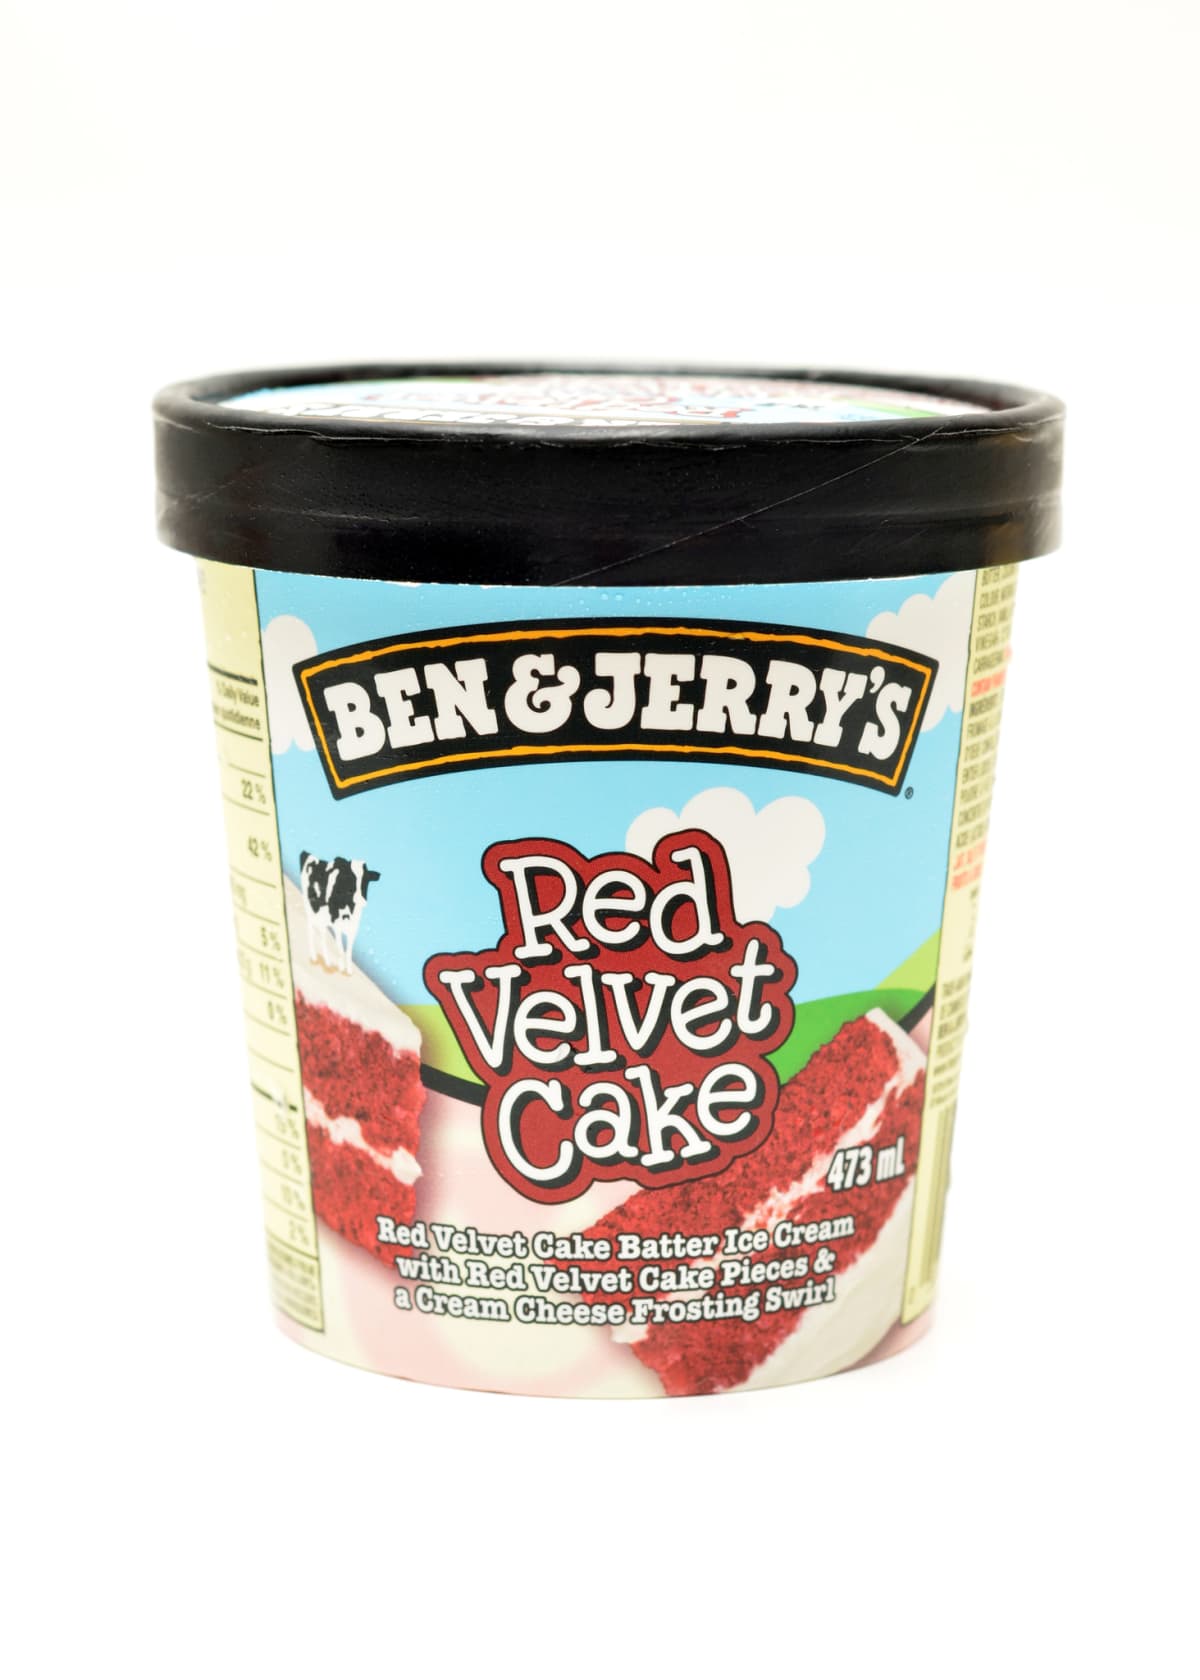 Ben and Jerry's Red Velvet Cake ice cream in carton on white background